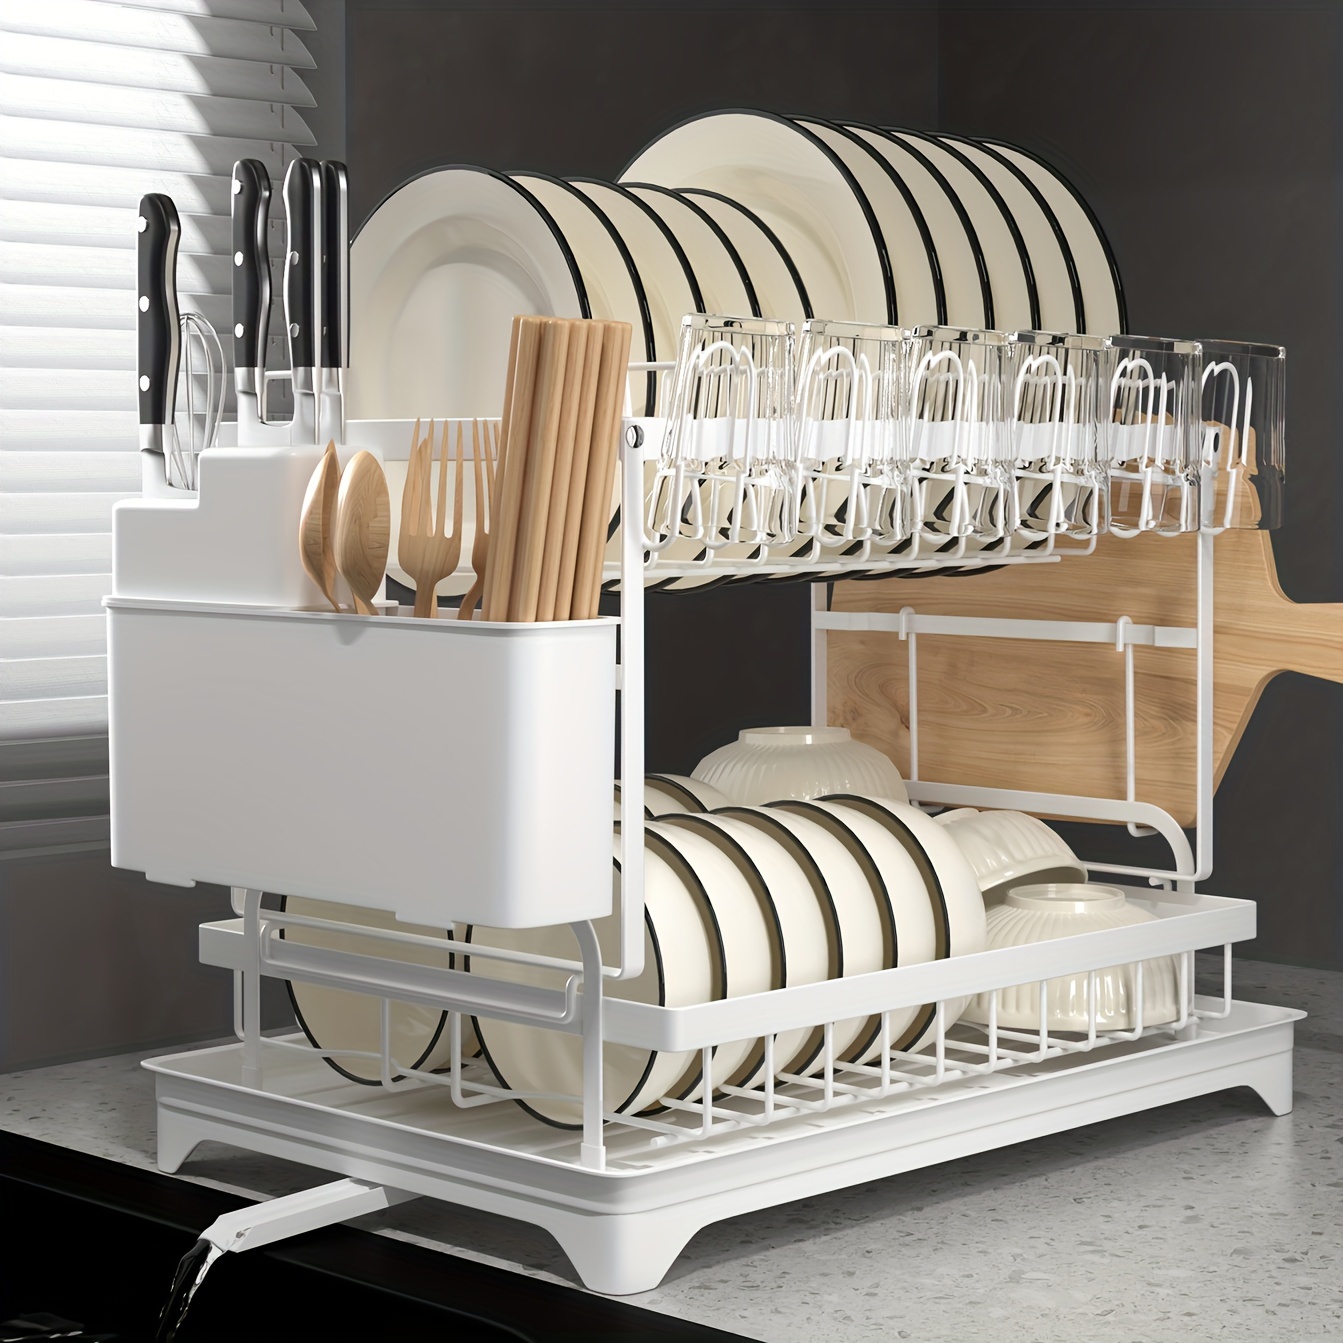 

Set Premium 2-tier Steel Dish Drying Rack - Includes Utensil Holder, Cup Holder, Extra Drying Mat - Space-saving, Rust-resistant, Durable, And Easy To Clean Kitchen Organizer